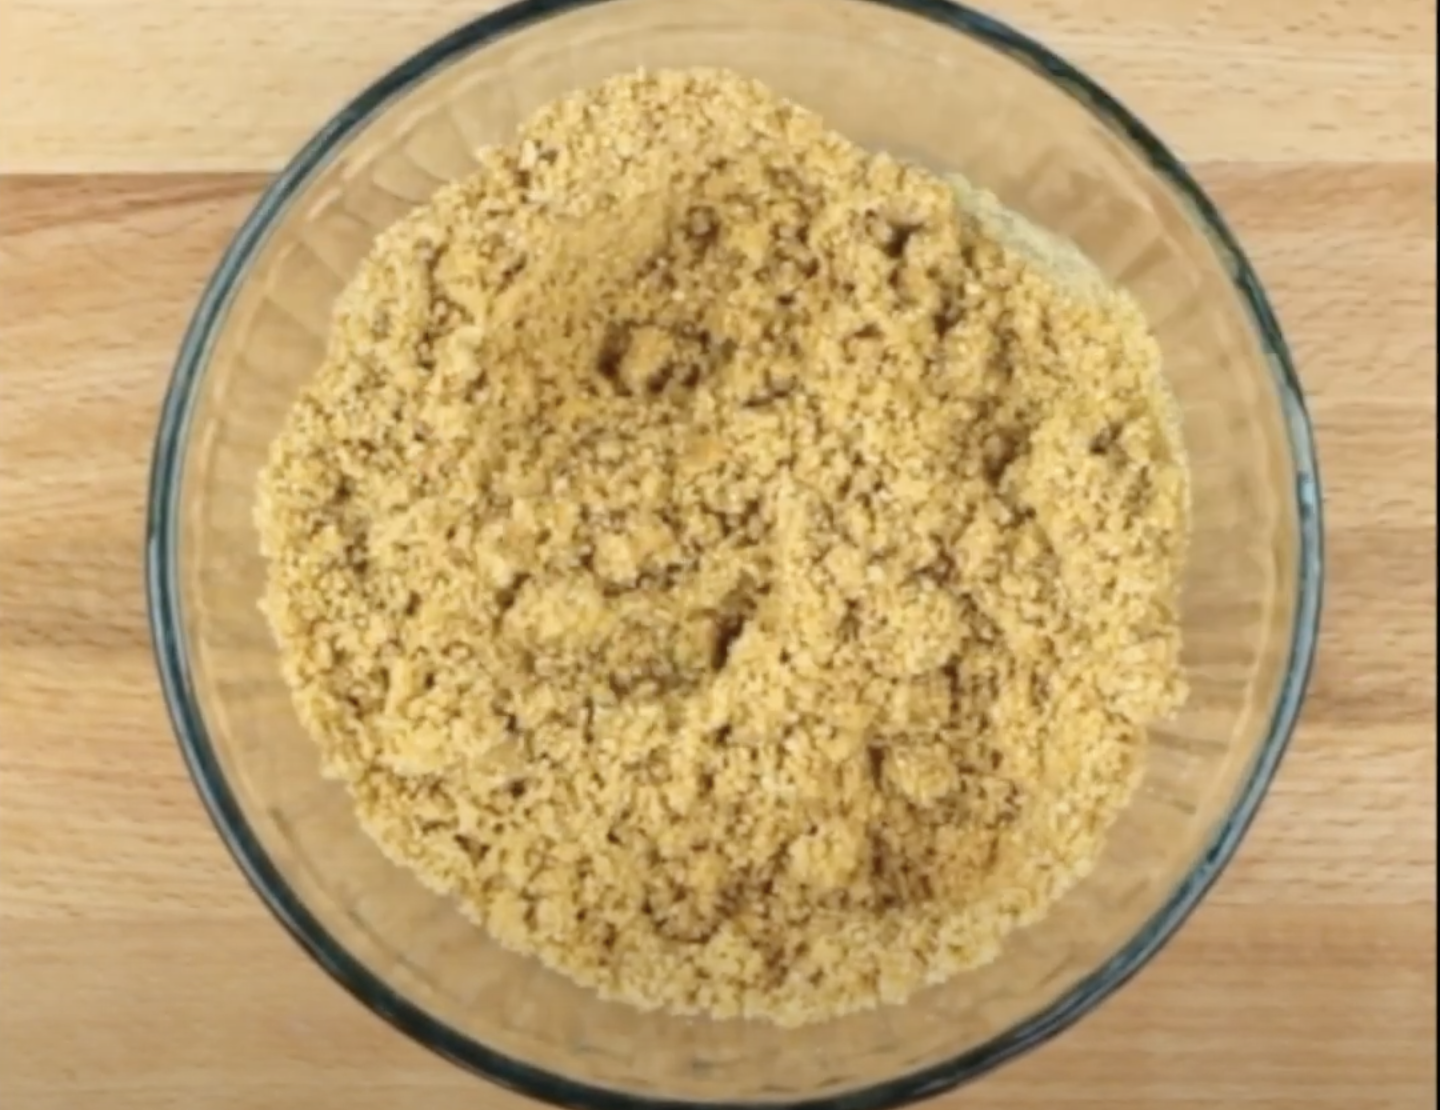 Crushed graham cracker crumbs in a bowl to make crust for Key Lime Pie